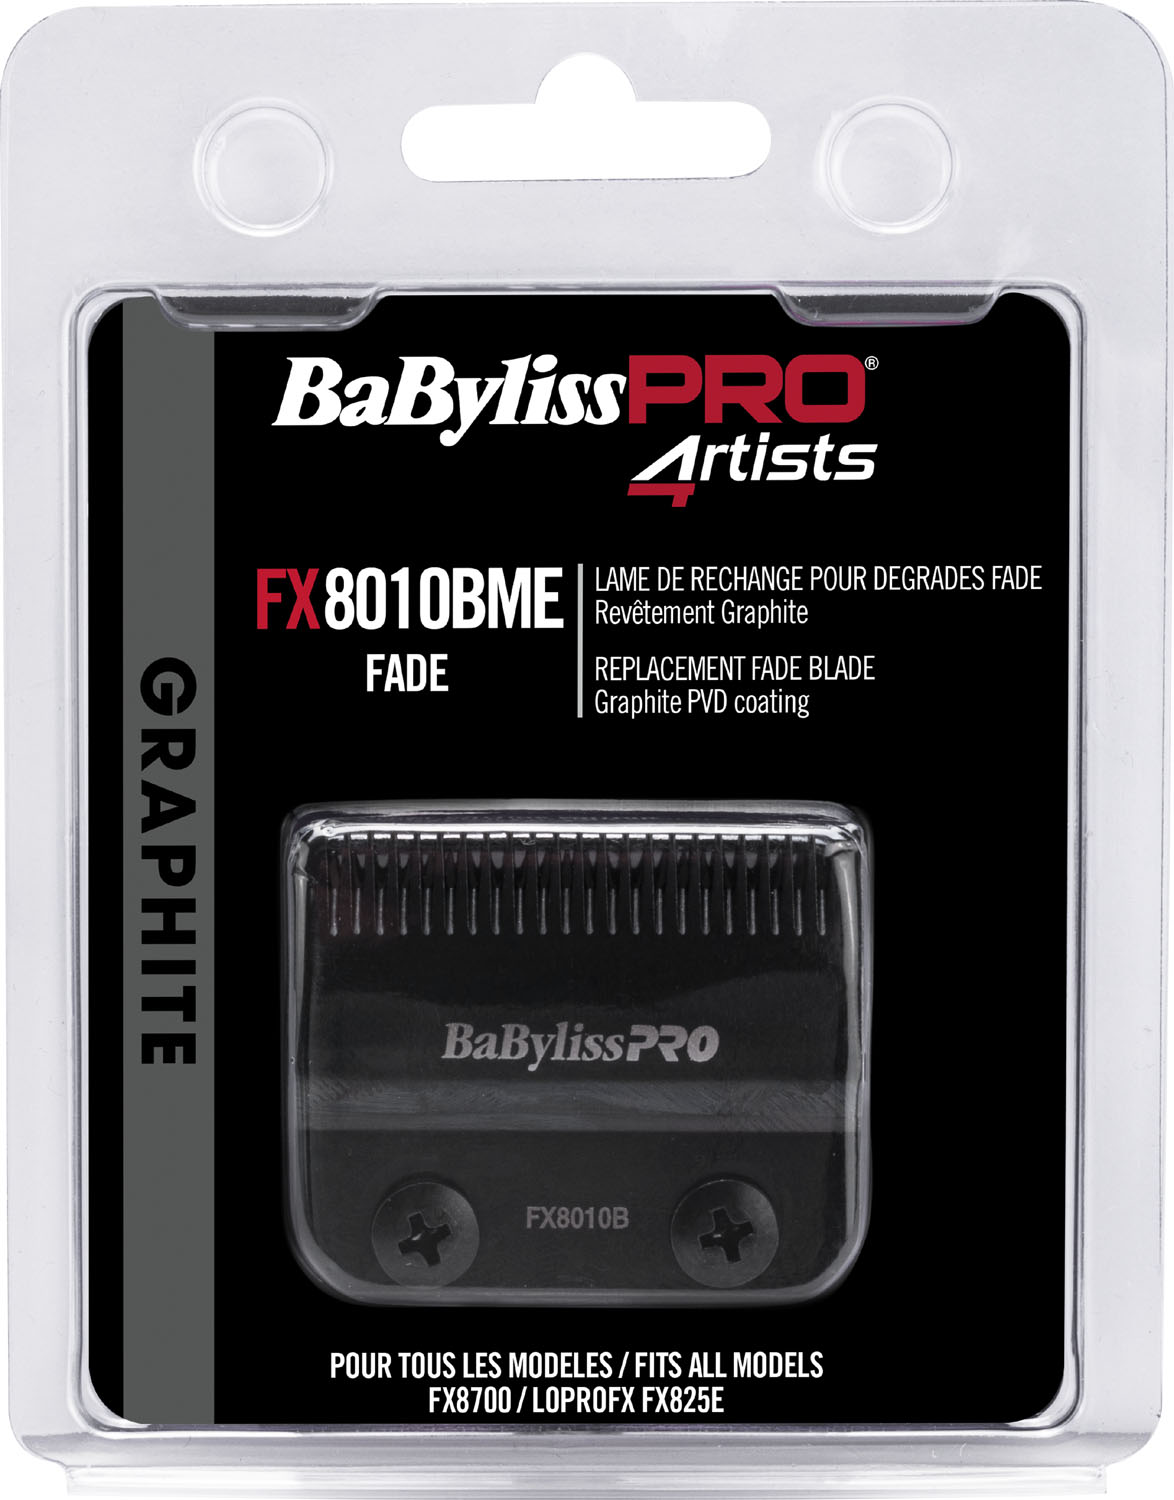  BaByliss PRO 4Artists Graphite Fade Blades 